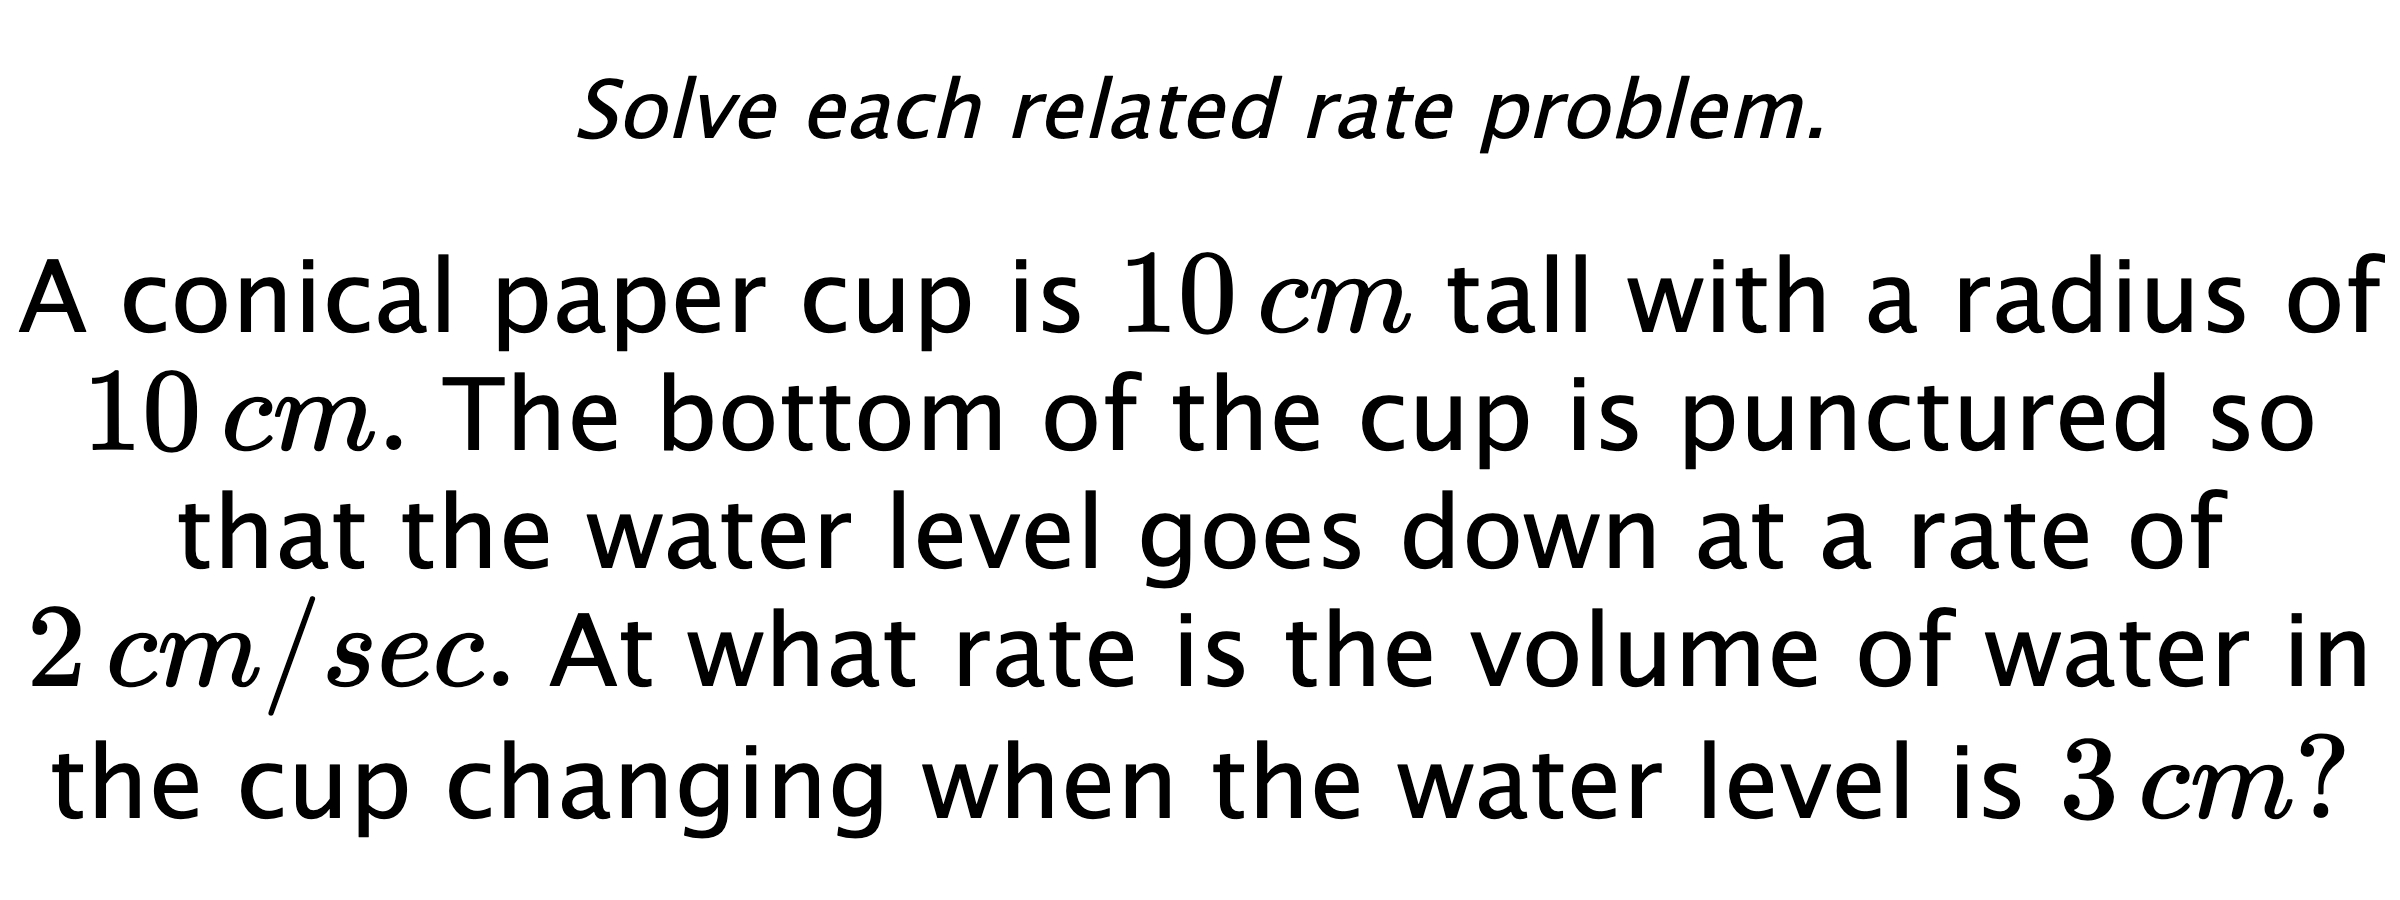 Solve each related rate problem. A conical paper cup is $10\,cm$ tall with a radius of $10\,cm.$ The bottom of the cup is punctured so that the water level goes down at a rate of $2\,cm/sec.$ At what rate is the volume of water in the cup changing when the water level is $3\,cm?$